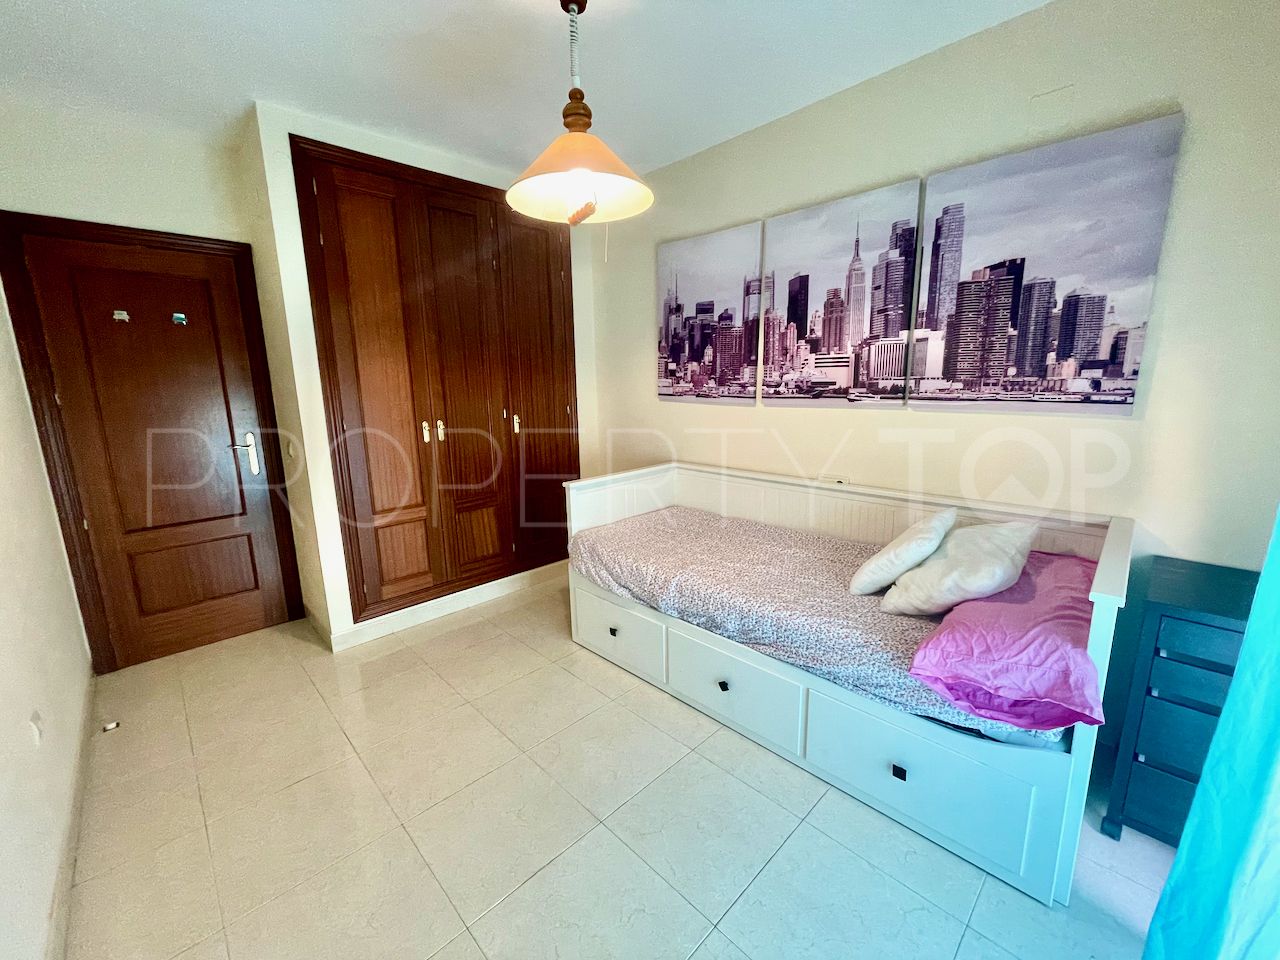 Duplex penthouse for sale in El Castillo with 3 bedrooms